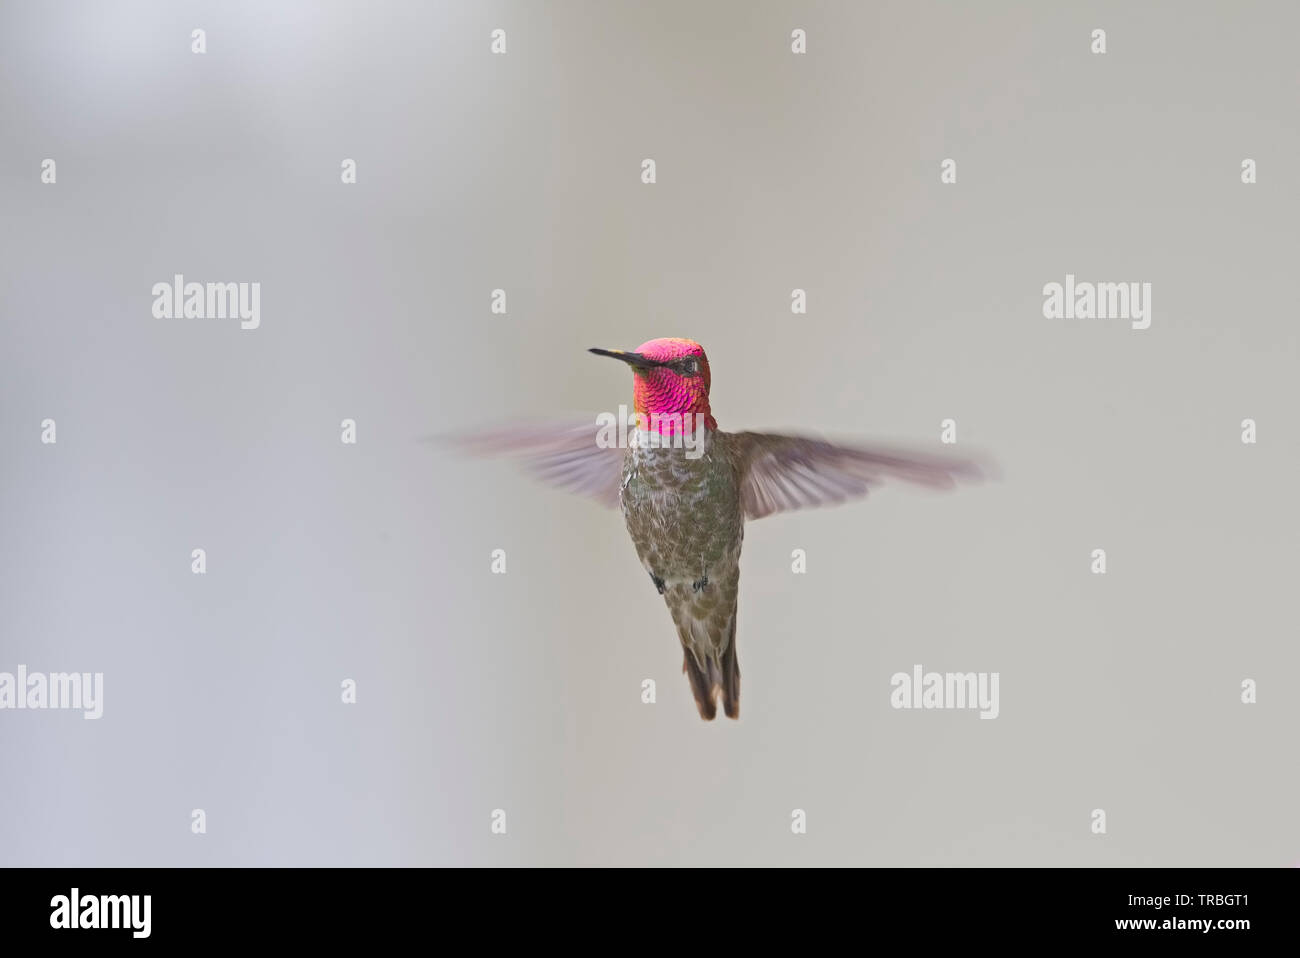 Anna's Hummingbird Hovering mâle Banque D'Images